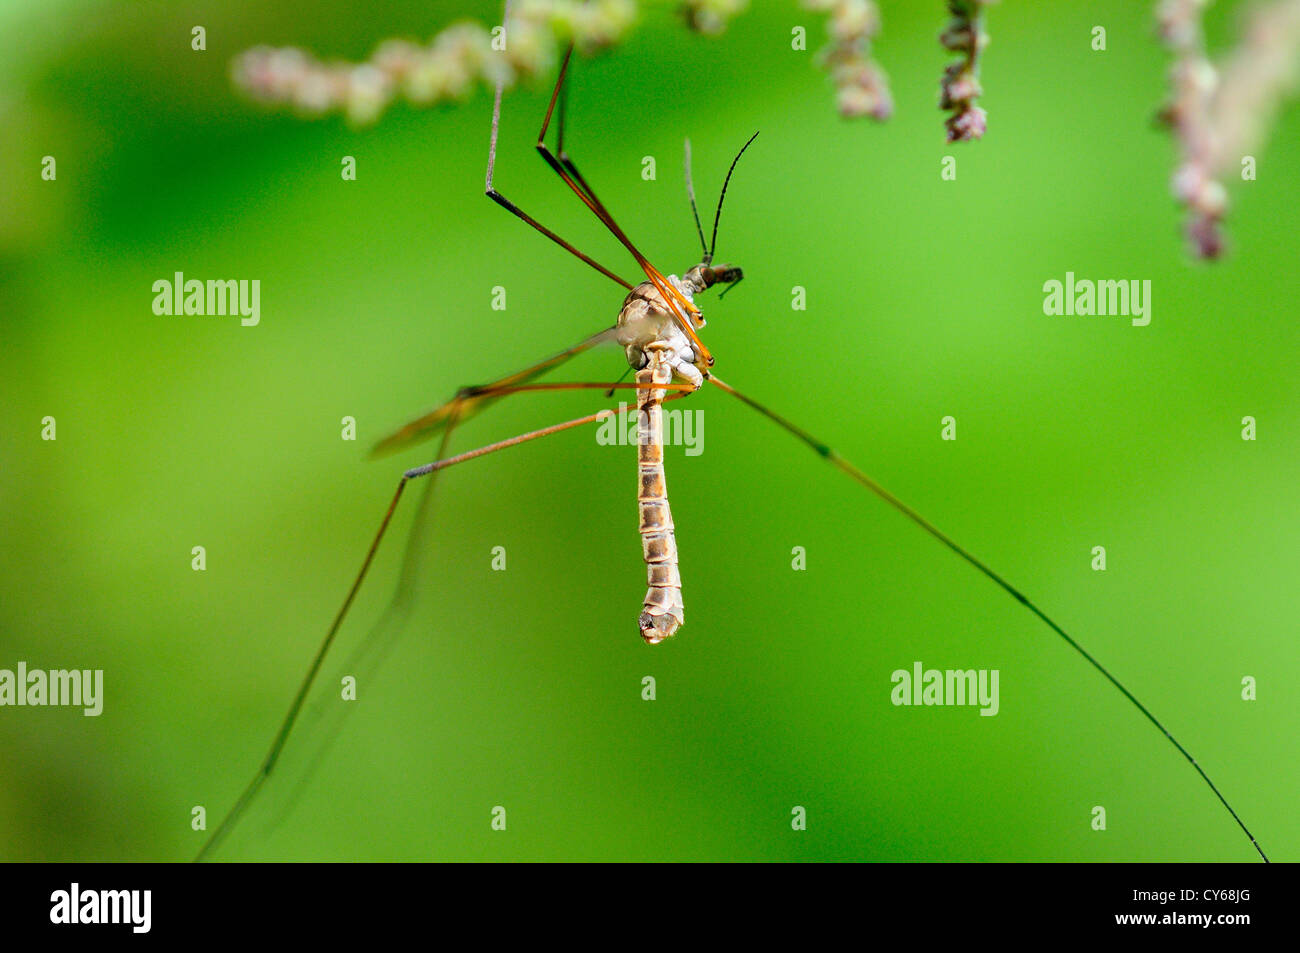 A crane fly or daddy-long-legs insect UK Stock Photo